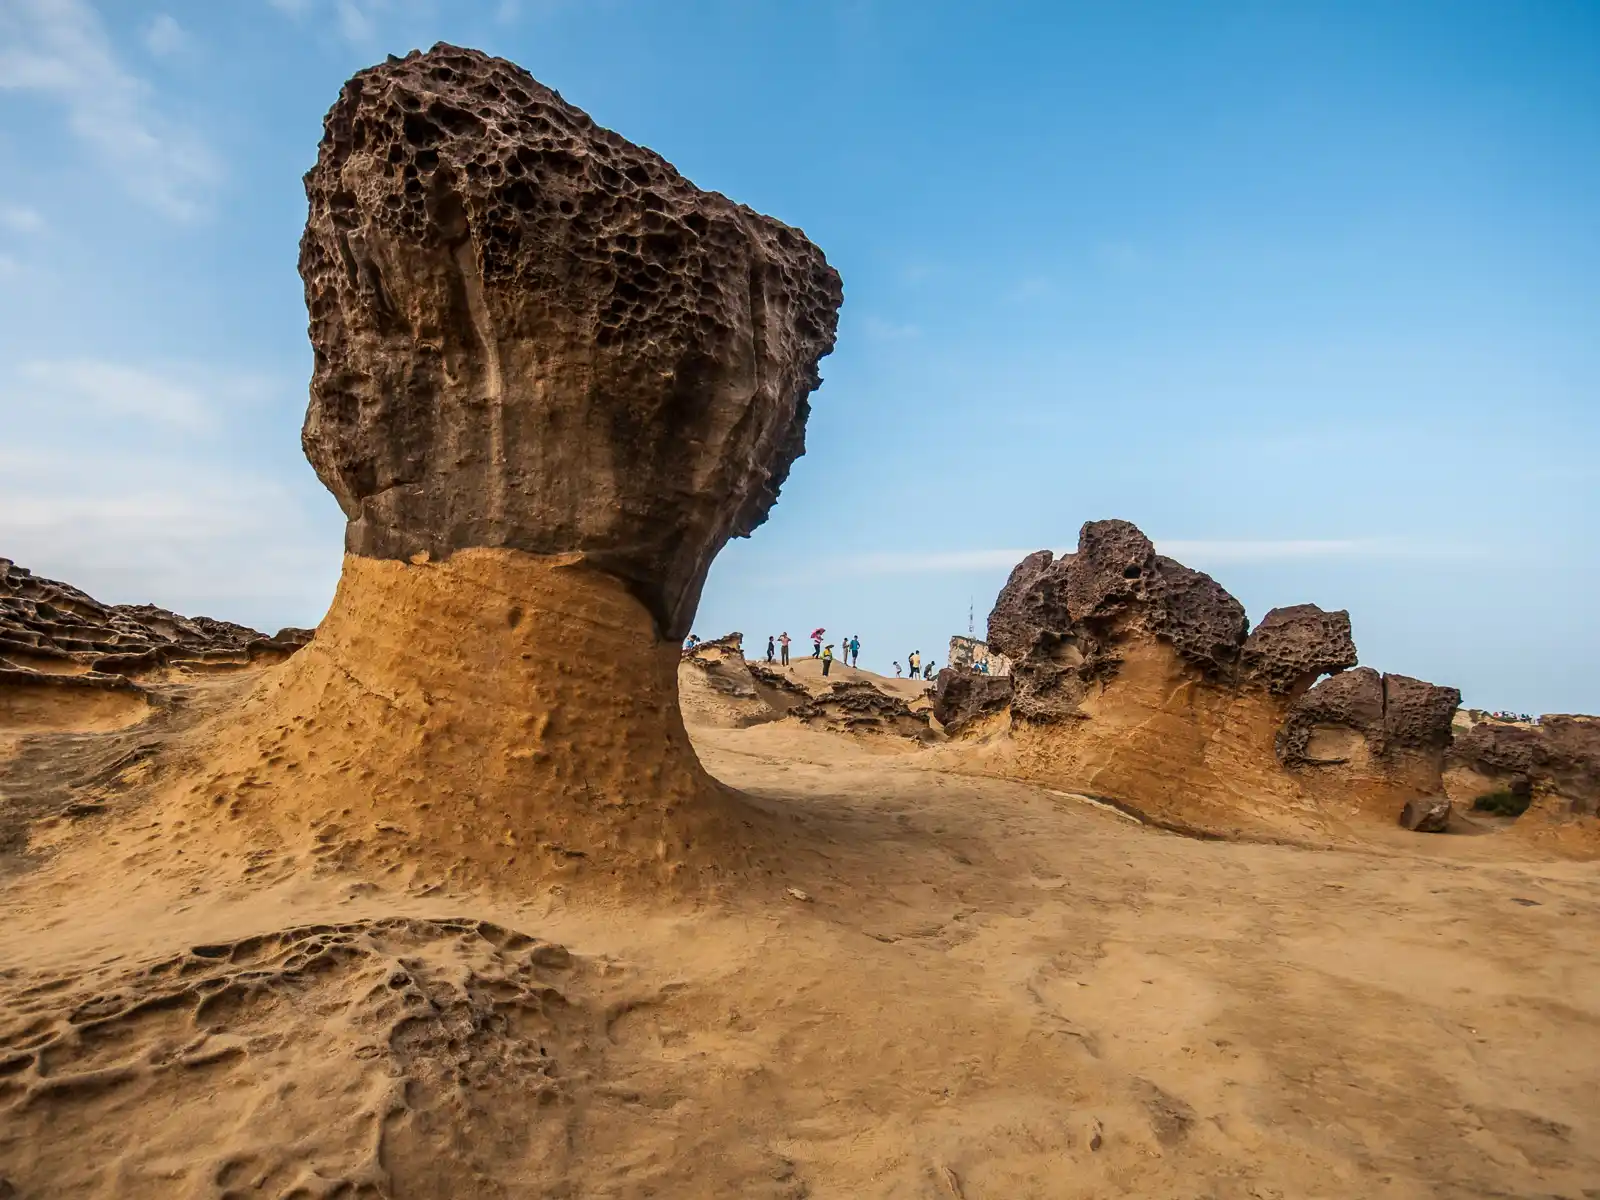 A tofu-shaped rock that features honeycomb erosion is perched over smooth sandstone.